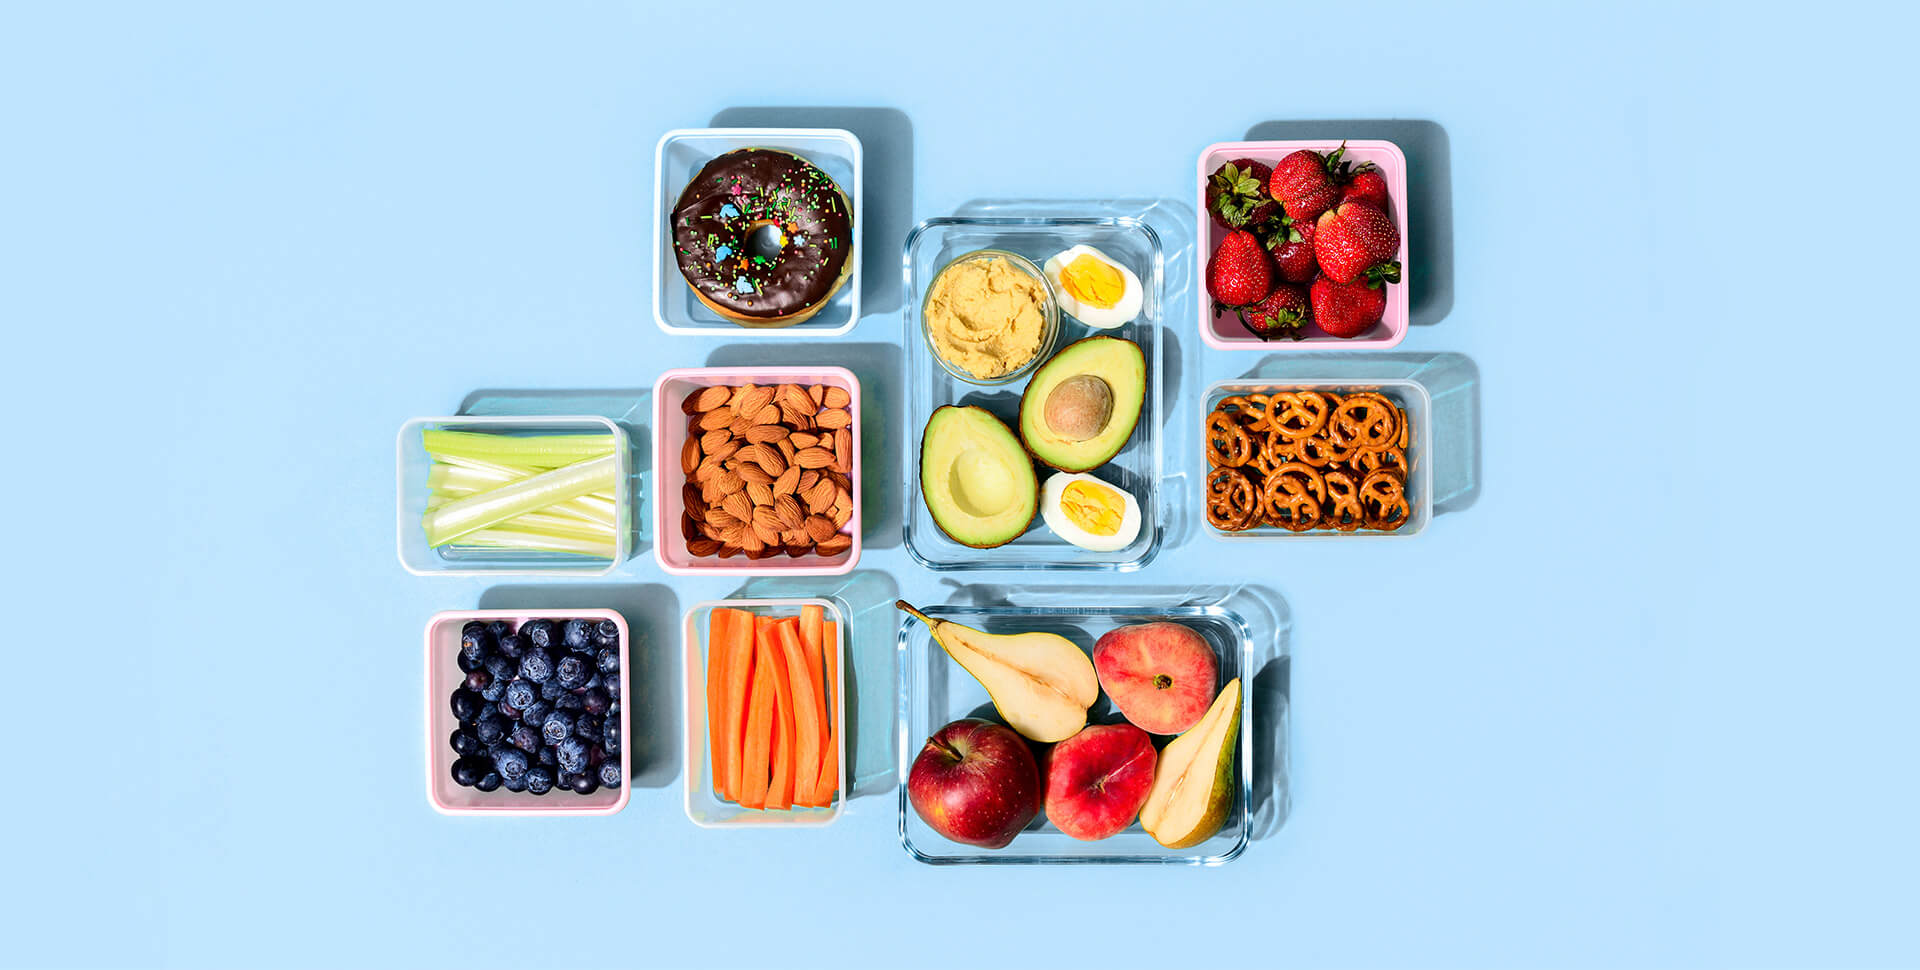 Various types of snacks in reusable containers against a light blue background